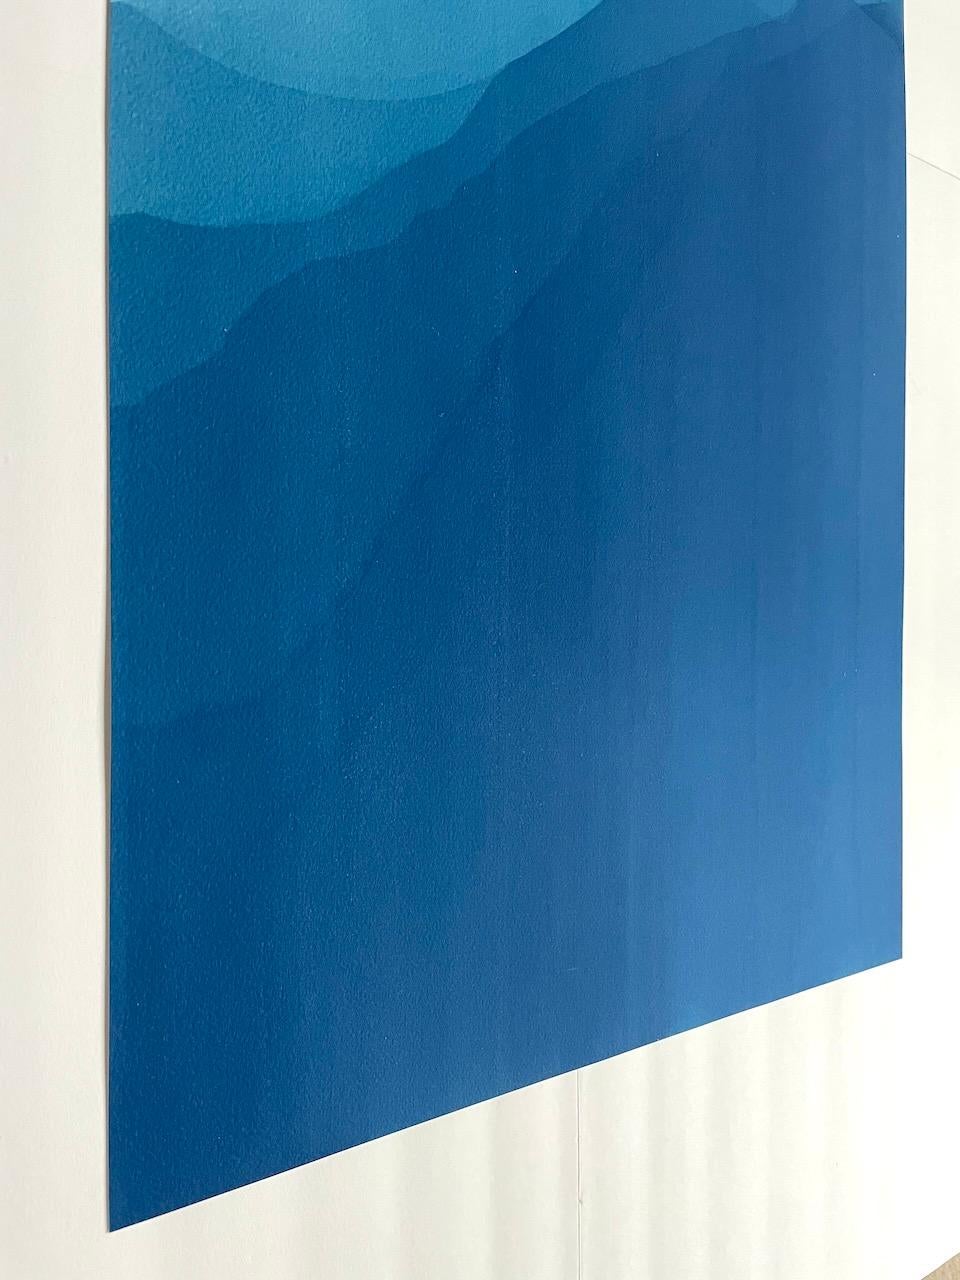 Sea Cliffs 7 (Hand-printed 40 x 20 inch abstract cyanotype) For Sale 7